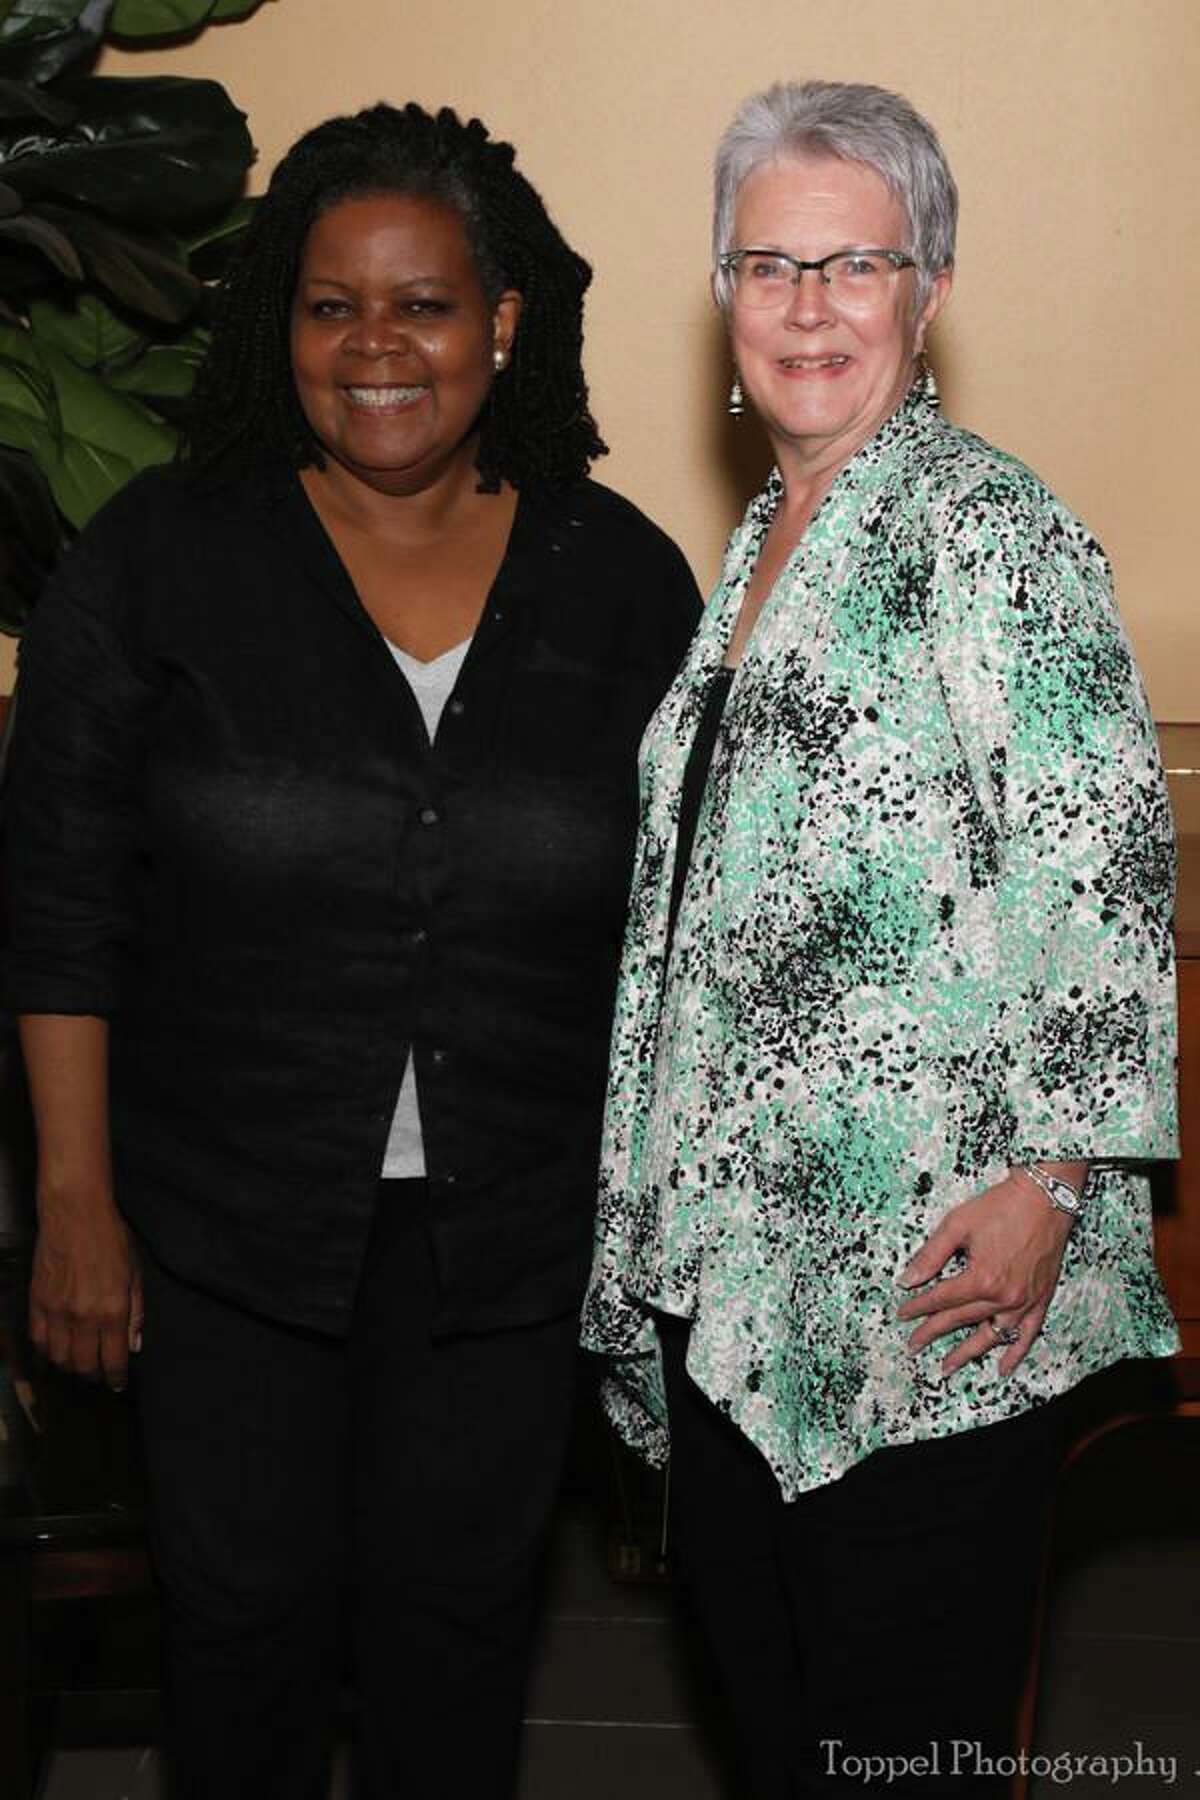 On June 12, Conroe native and Pulitzer Prize winner Annette Gordon-Reed spoke in Conroe at the Owen Theatre. She spoke about her book "On Juneteenth" that was published in May 2021. Her presentation was hosted by the Heritage Museum of Montgomery County. Pictured are Annette Gordon-Reed and Heritage Museum Executive Director Suann Hereford. They were classmates on The Flare yearbook staff. 